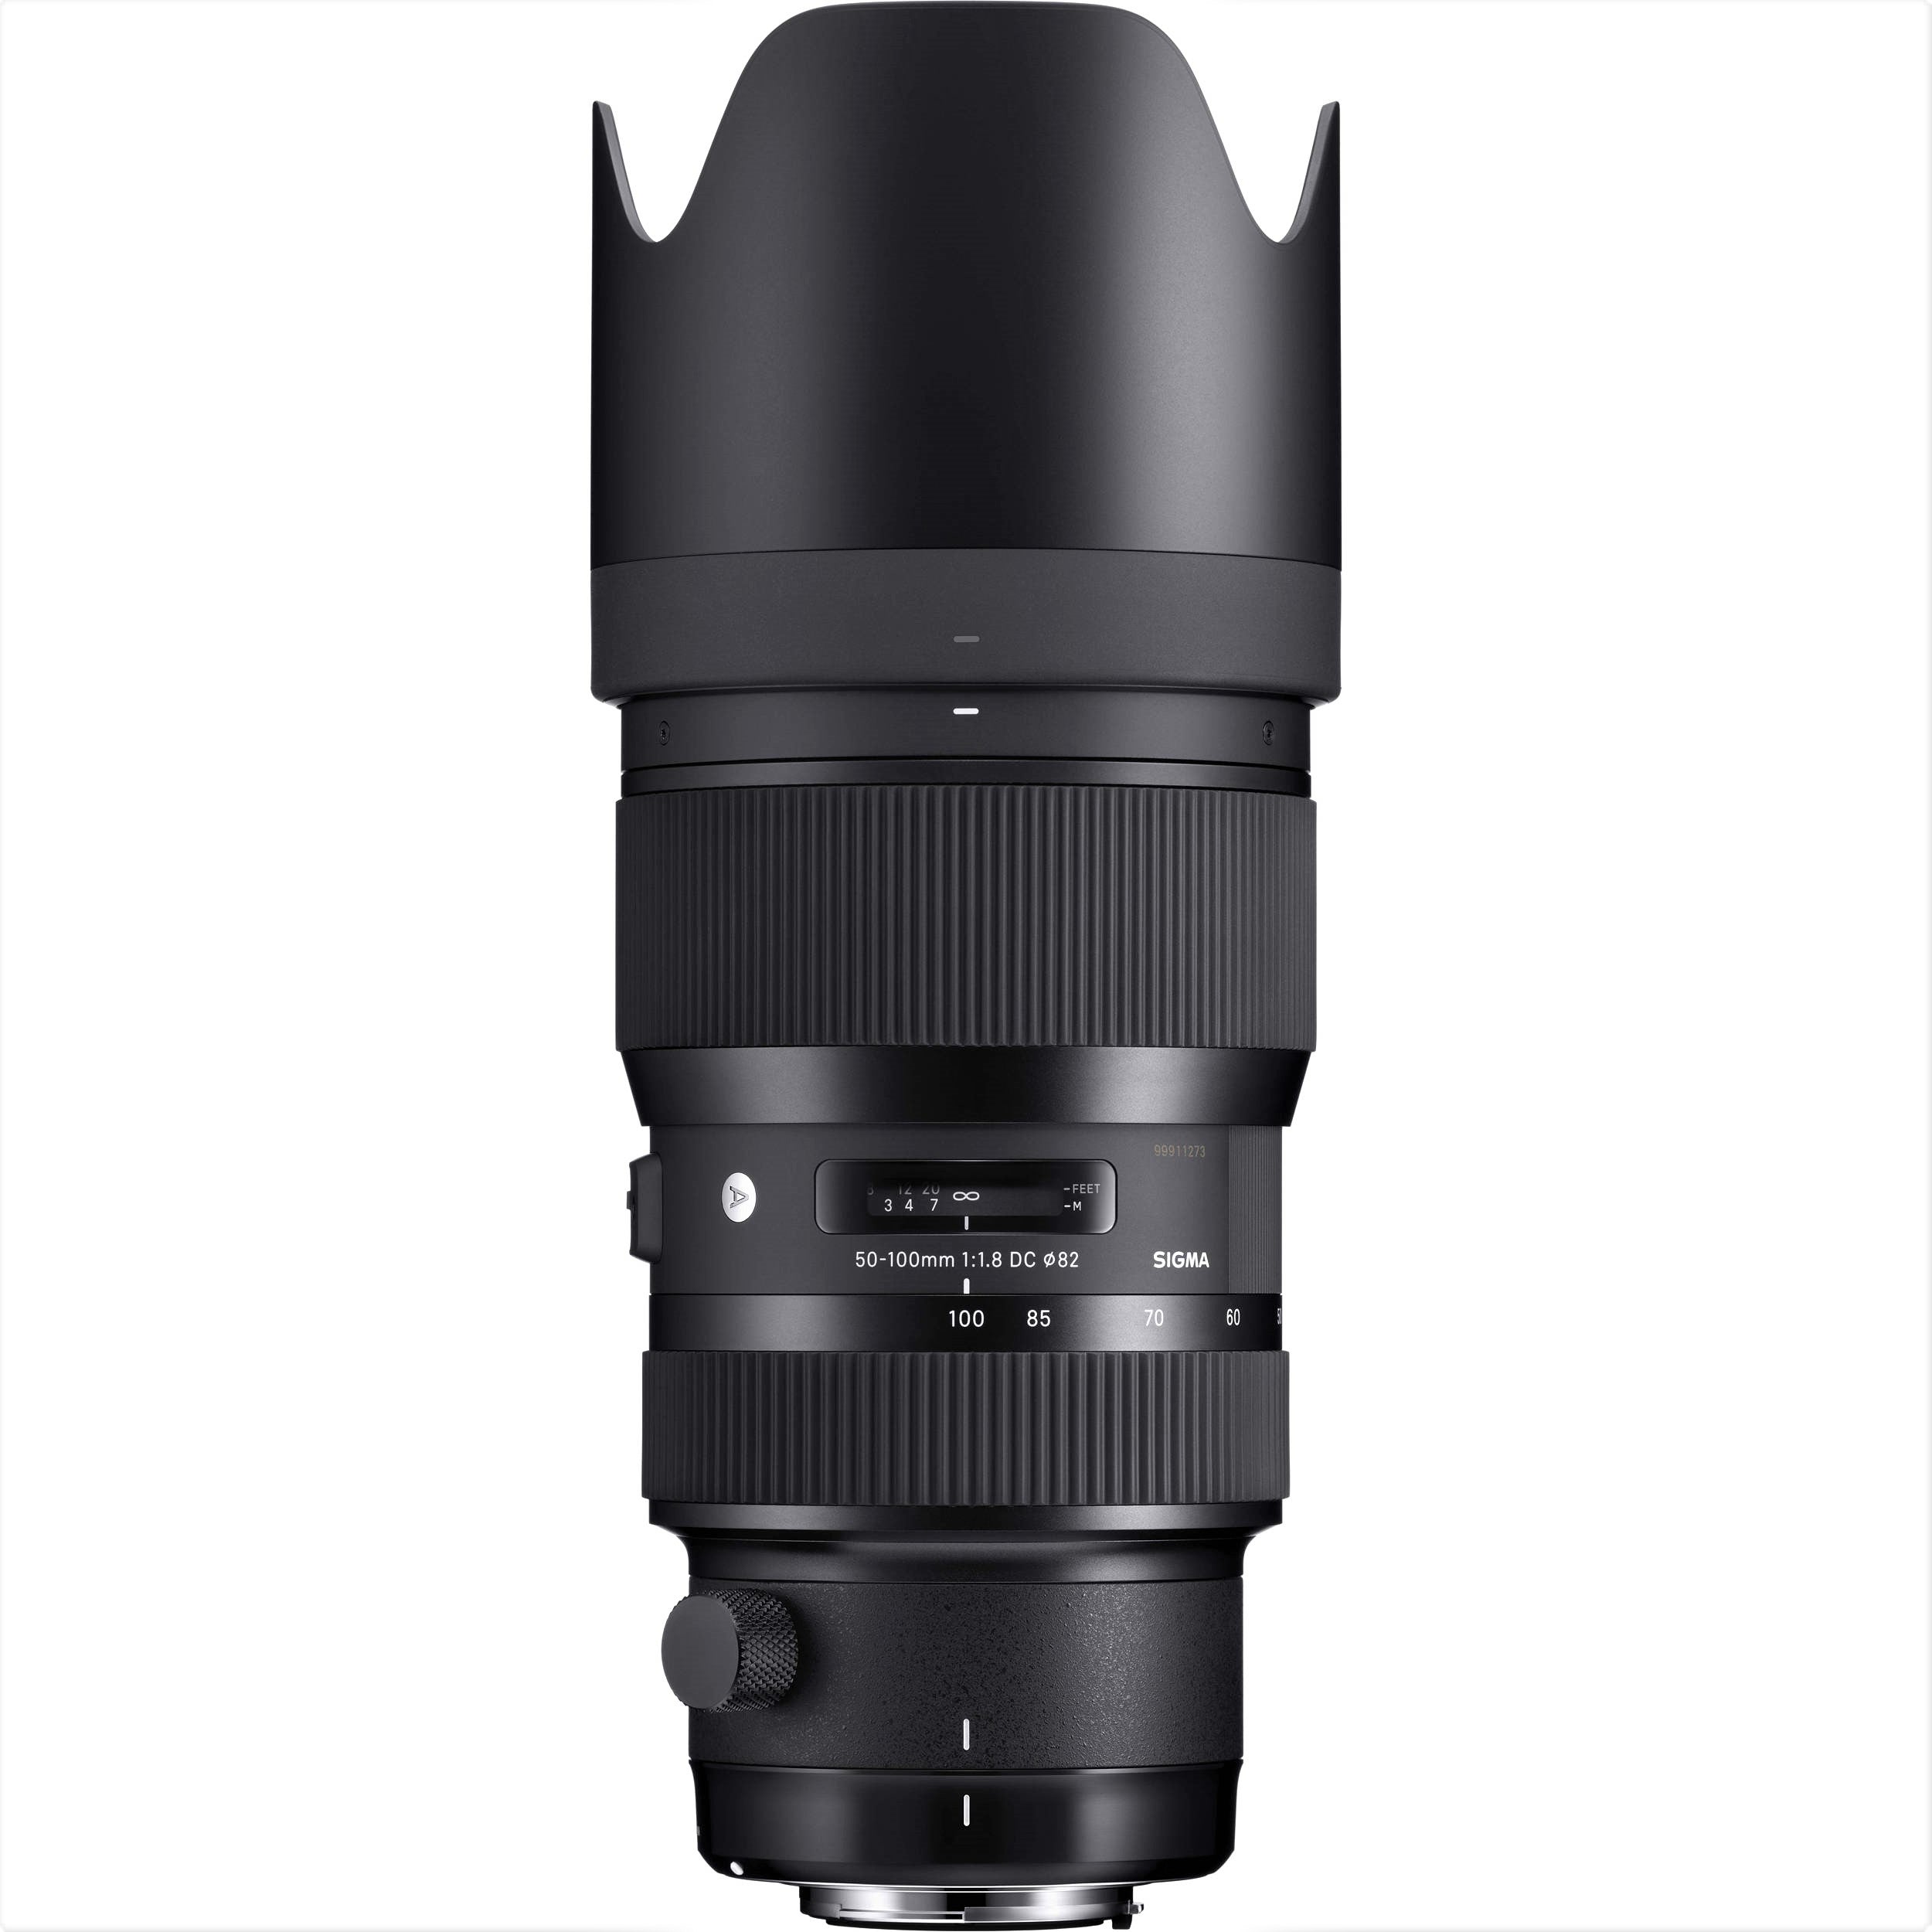 Sigma 50-100mm F1.8 DC HSM Art Lens for Sigma SA with Attached Lens Hood on the Top